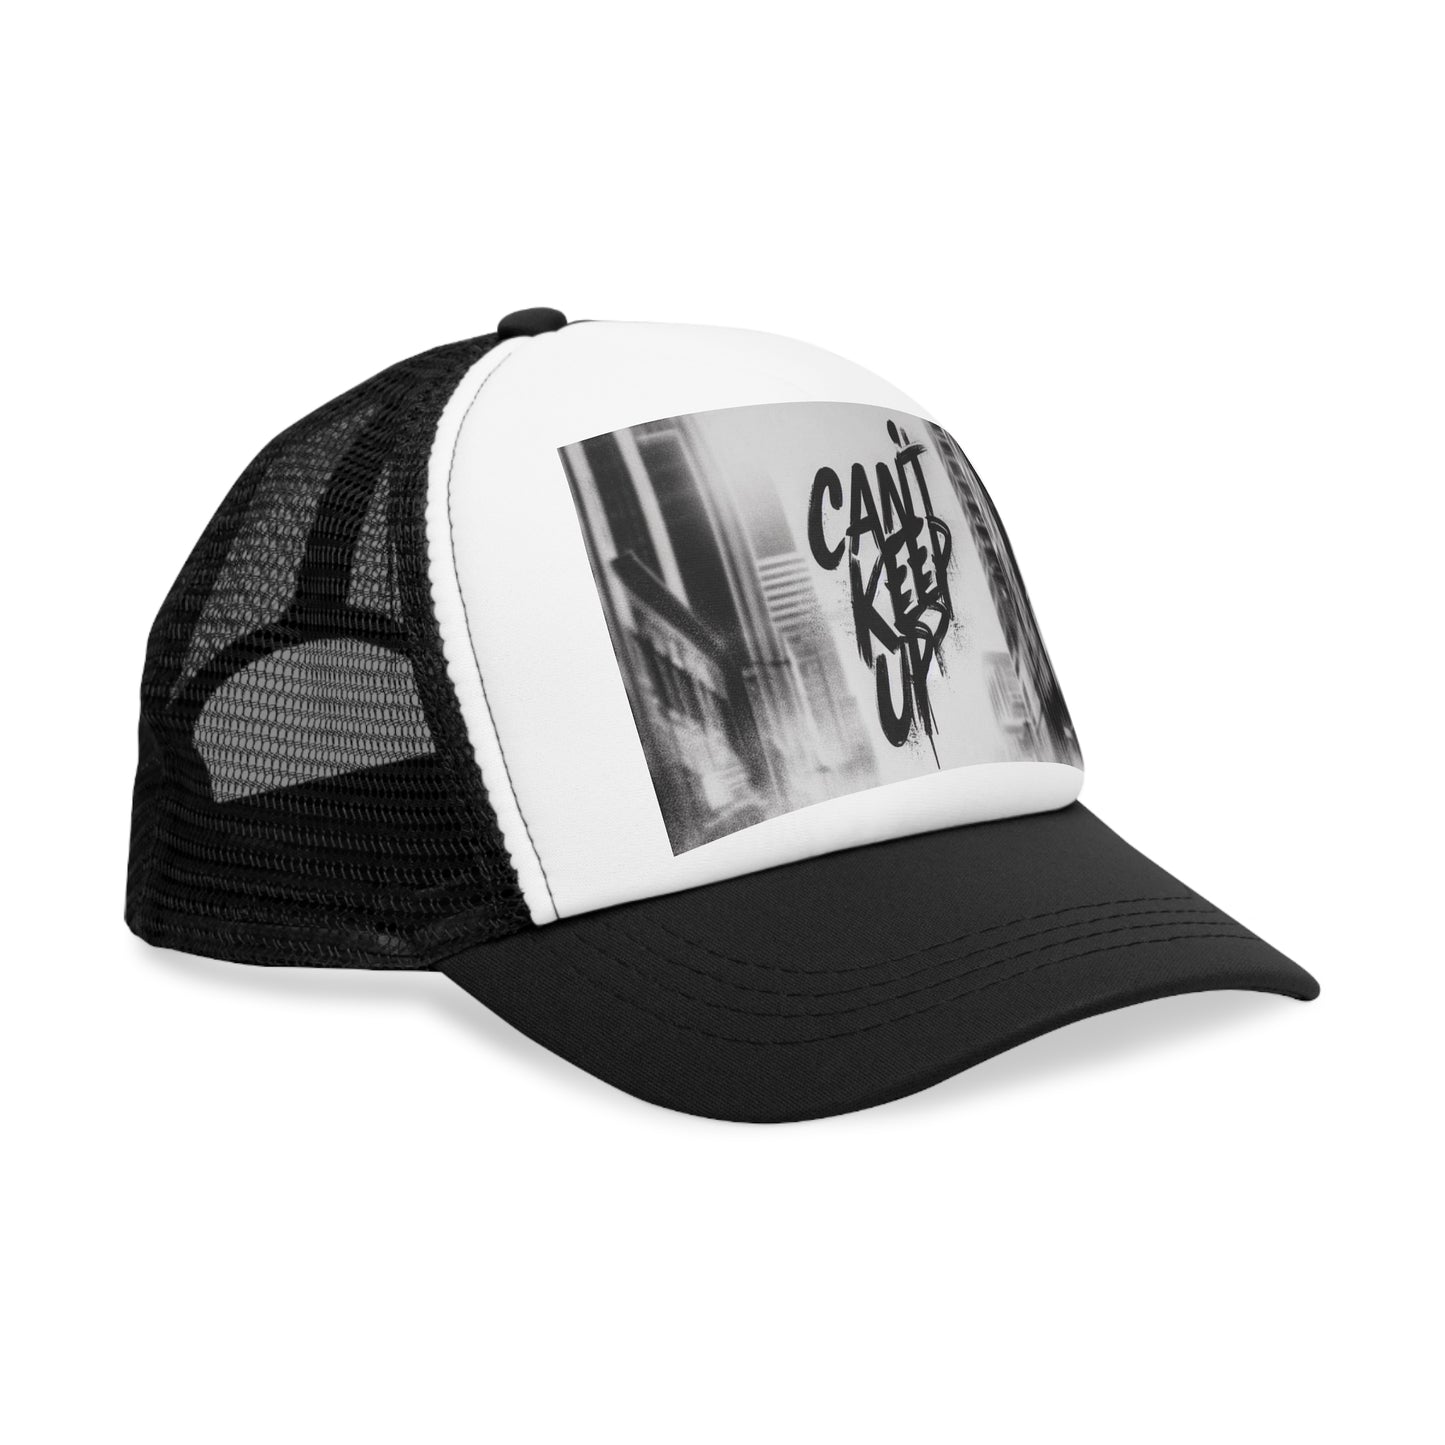 Cant Keep Up Trucker Hat